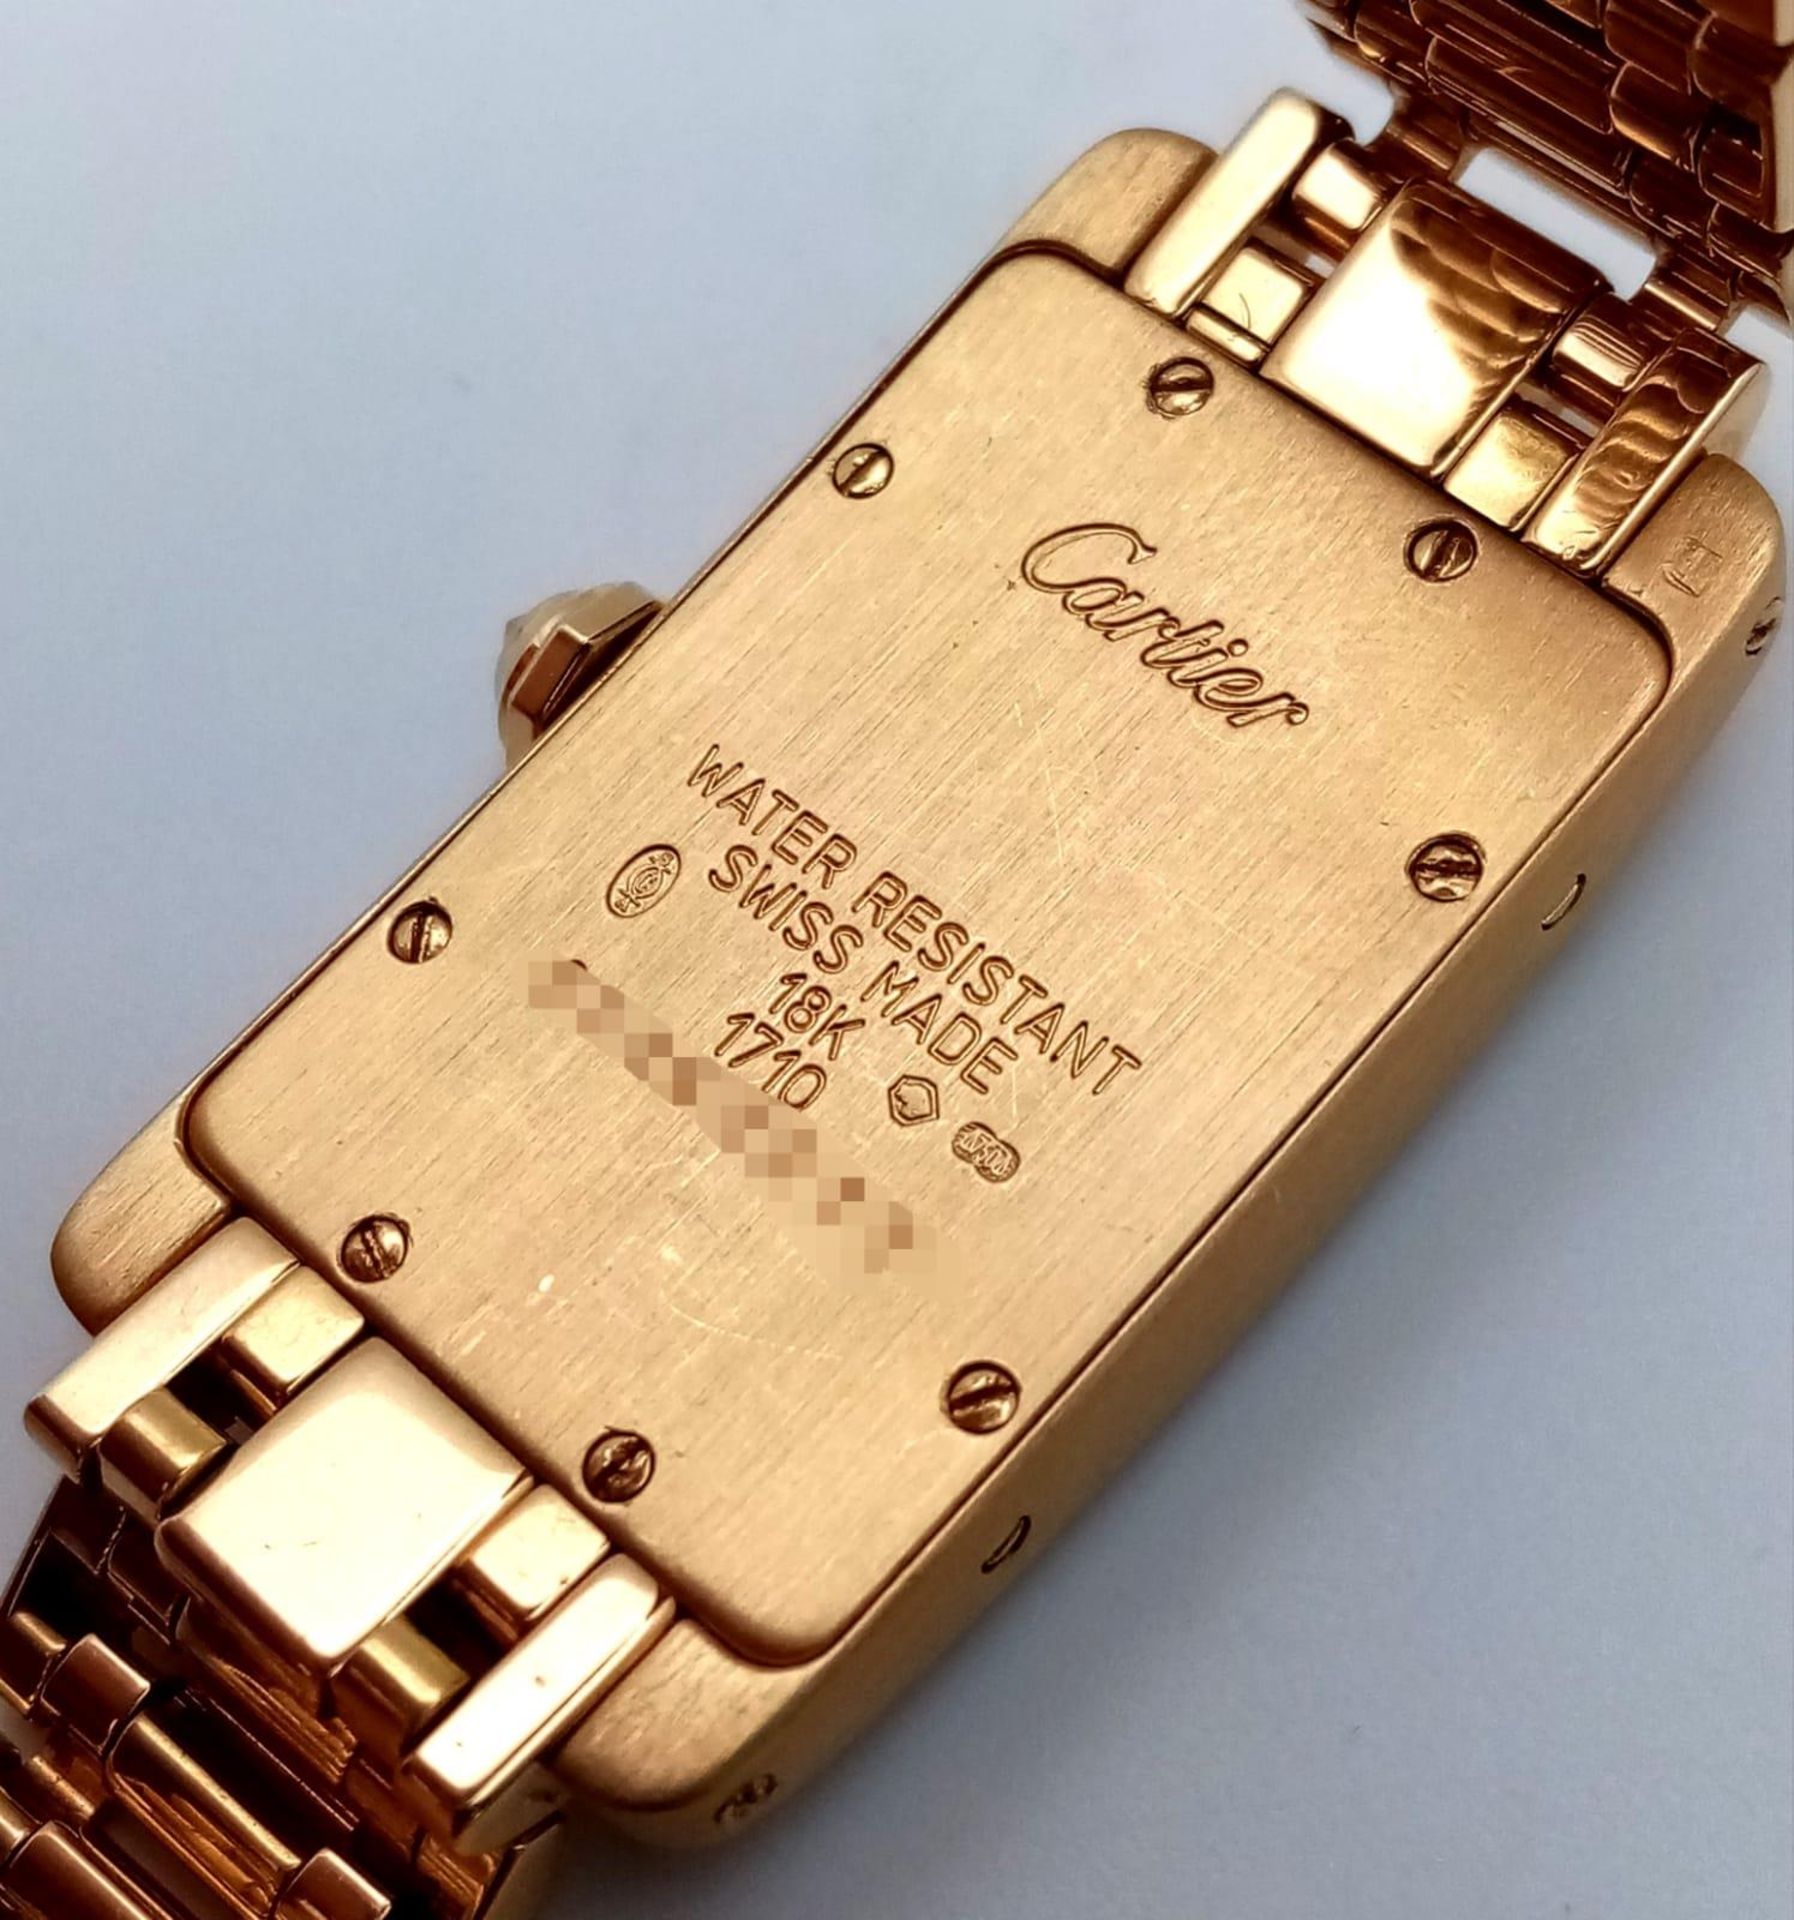 An 18K Gold and Diamond Cartier Tank Americaine Ladies Watch. 18K gold bracelet and case - 19mm - Image 5 of 8